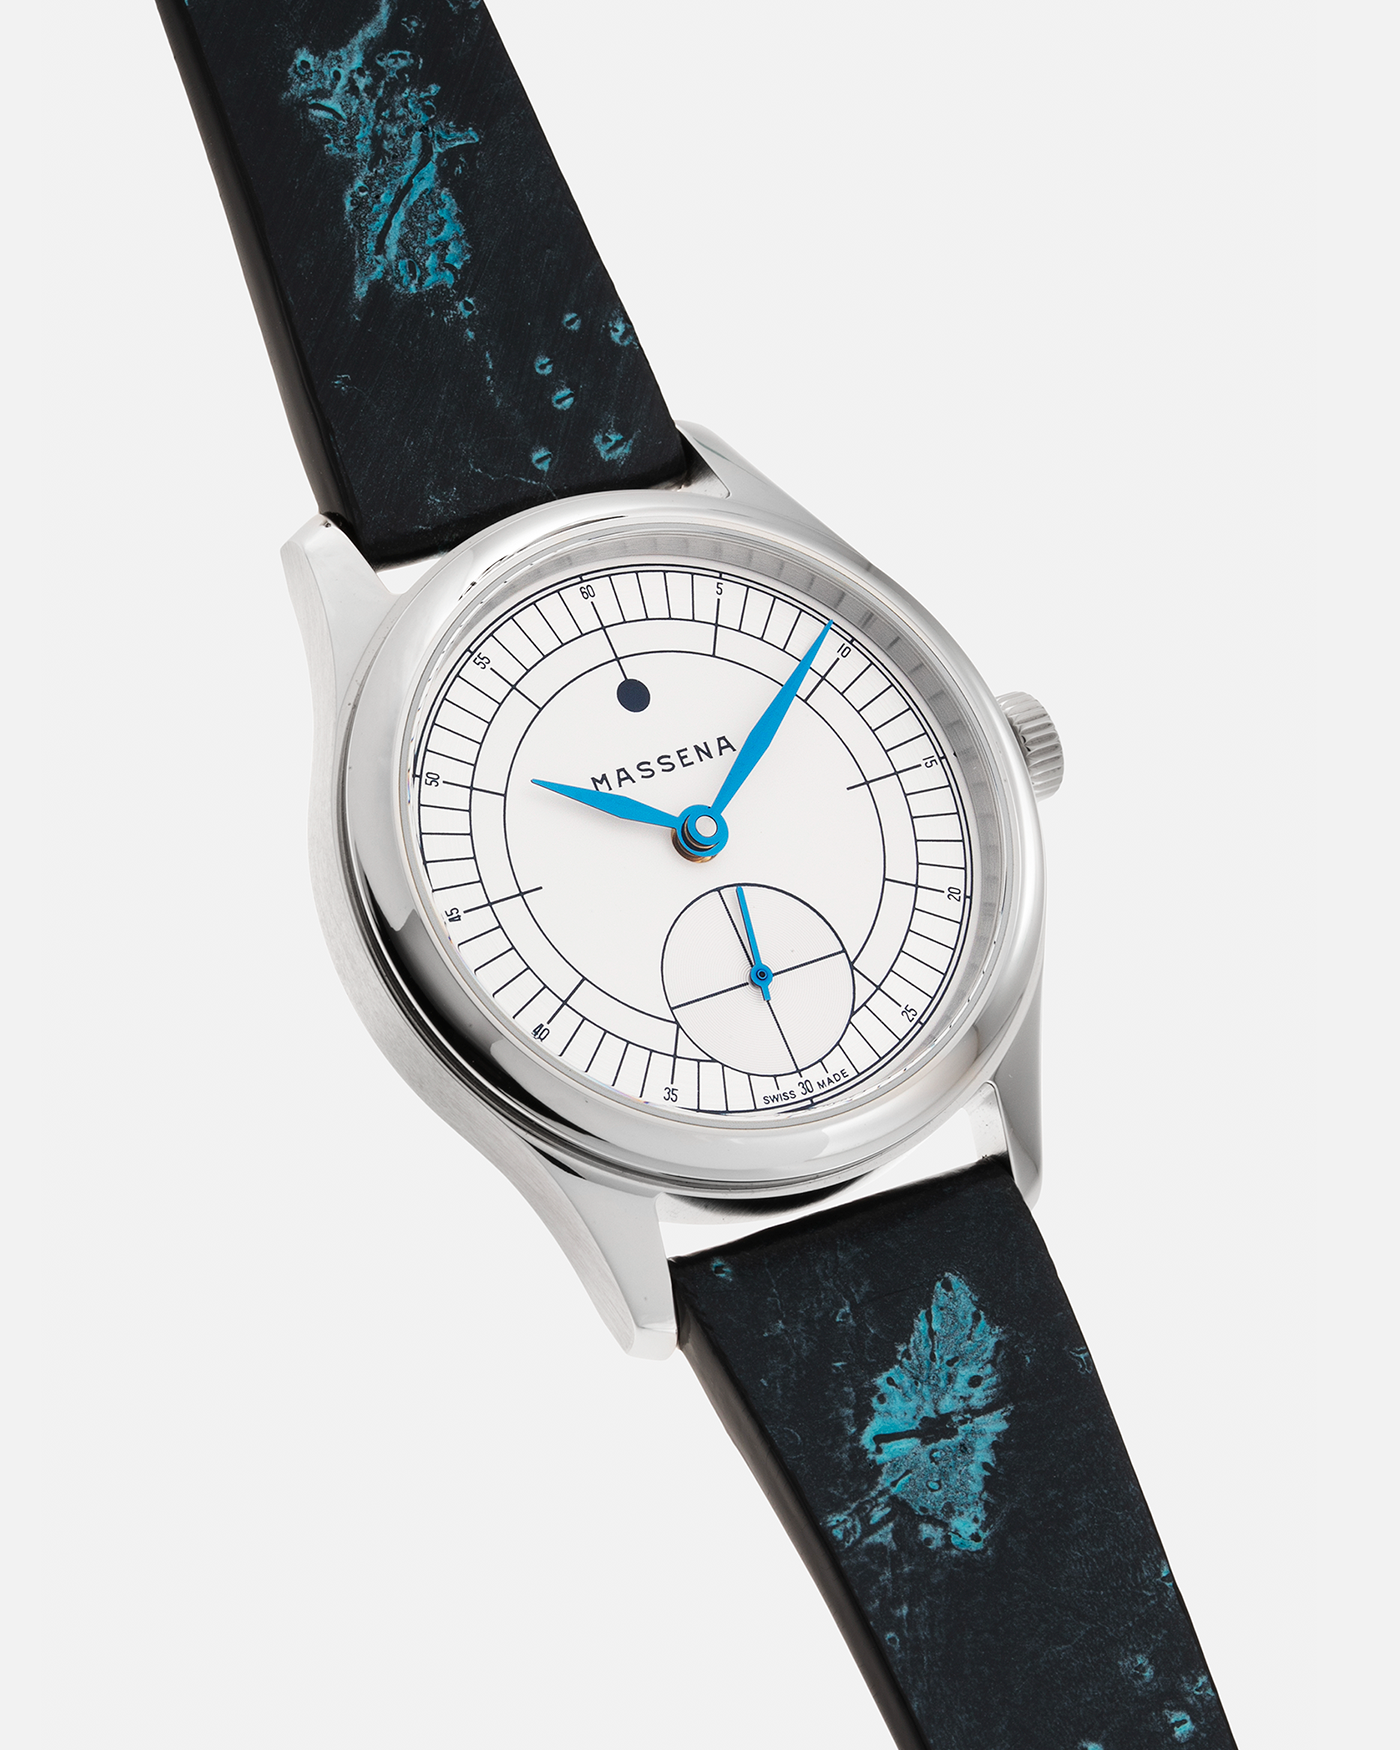 Brand: Massena LAB Year: 2023 Model: Massena LAB x Raúl Pagès Magraph, Limited Edition of 99 Pieces Material: Stainless Steel Movement: Massena LAB Cal. M660 Designed by Raúl Pagès, Manual-Winding Case Diameter: 38.5mm Lug Width: 20mm Strap: Jean Rosseau Paris Sustainable Sturgeon Skin Strap with Stainless Steel Tang Buckle, additional Black Textured Calf Leather Strap.